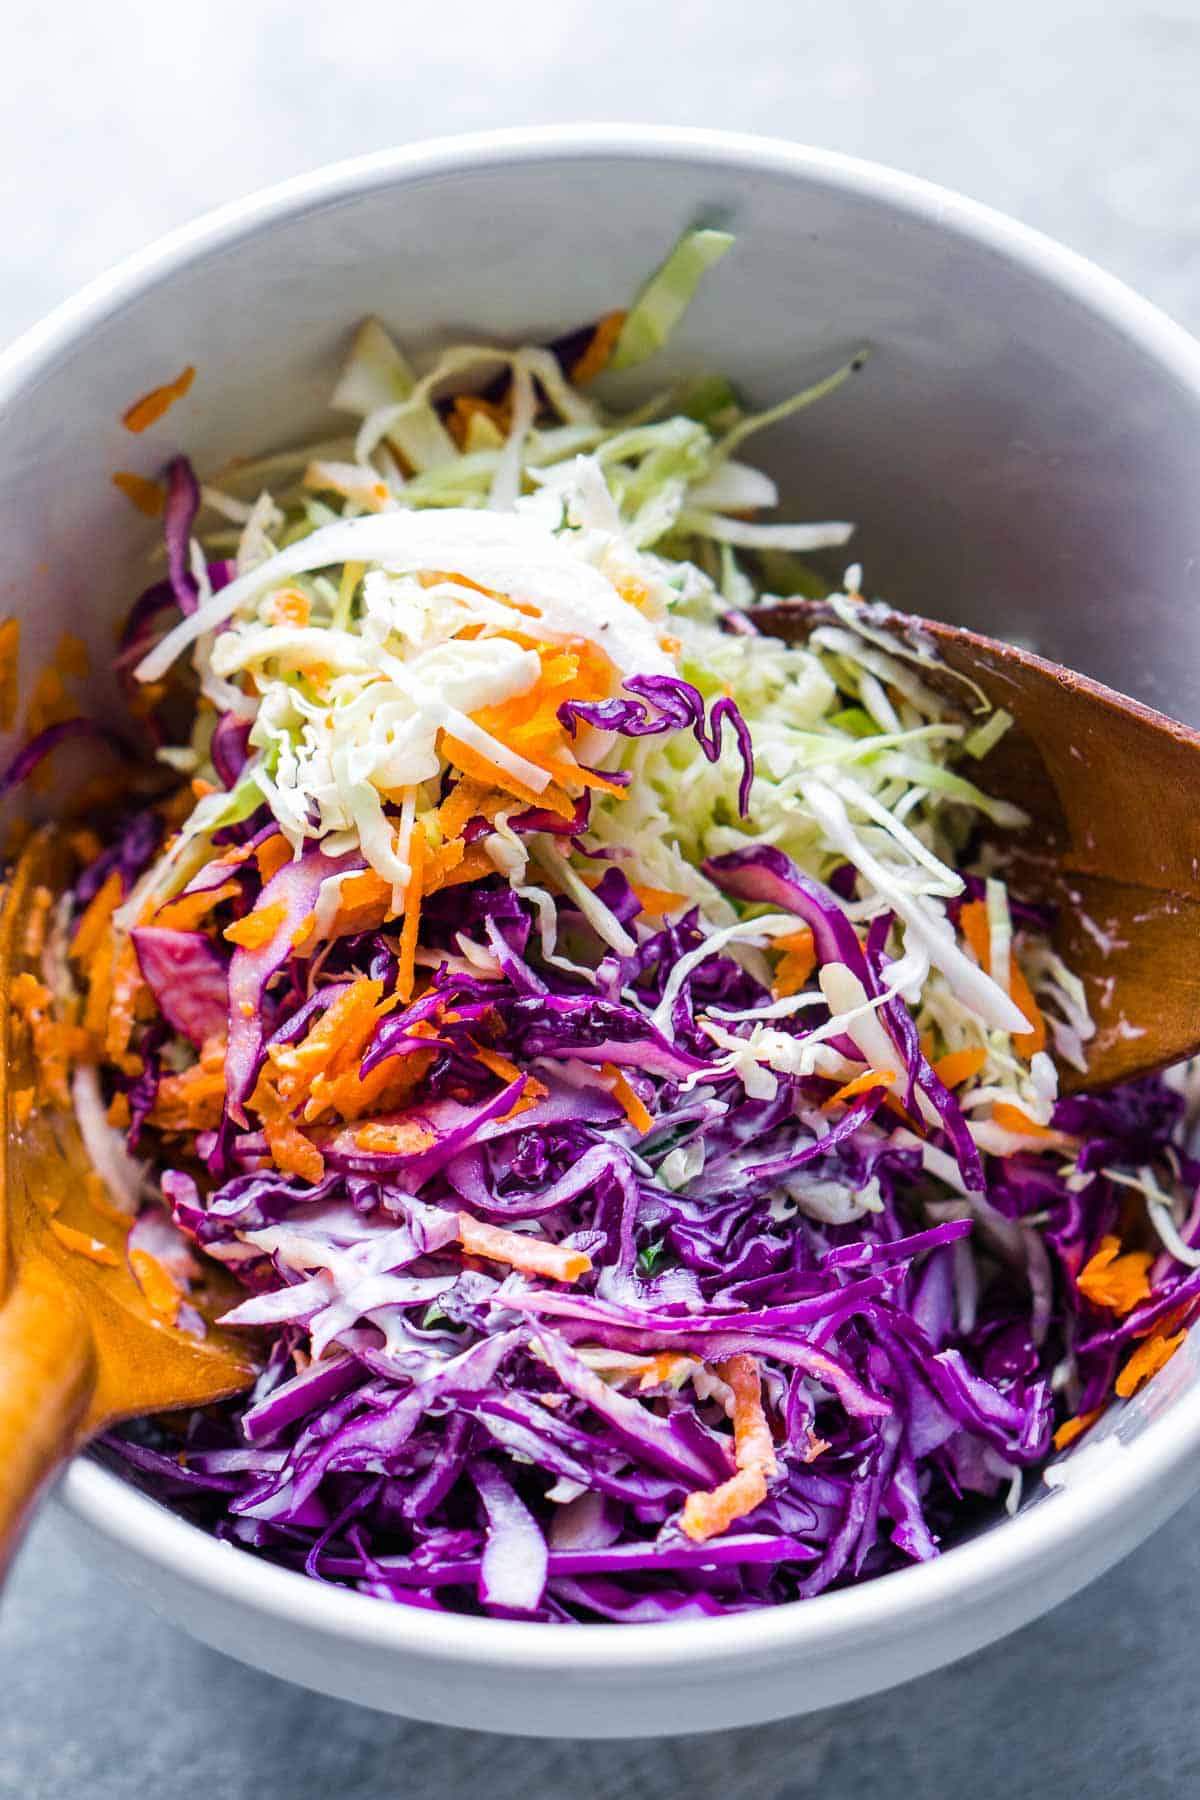 coleslaw salad ingredients in white bowl are tossed with wood salad utensils